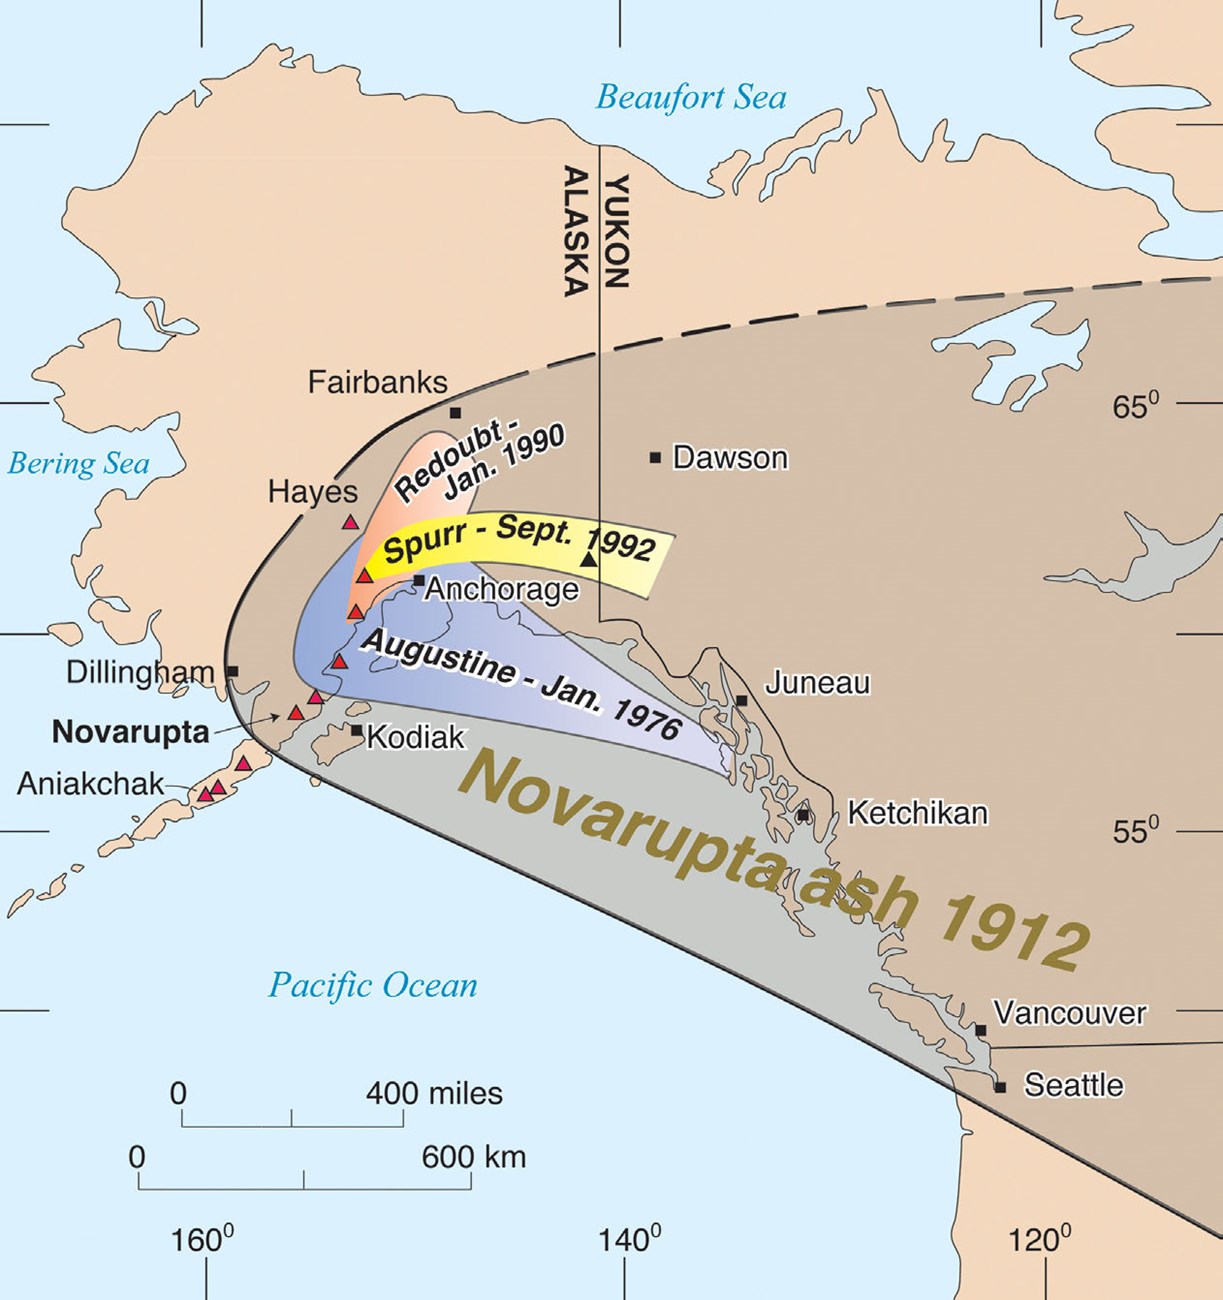 Map of Alaska and adjacent areas showing the location of Novarupta in Katmai NP and the region impacted by ash fall. Within a few days after 1912 eruption, the ash was carried by winds across the contentment.